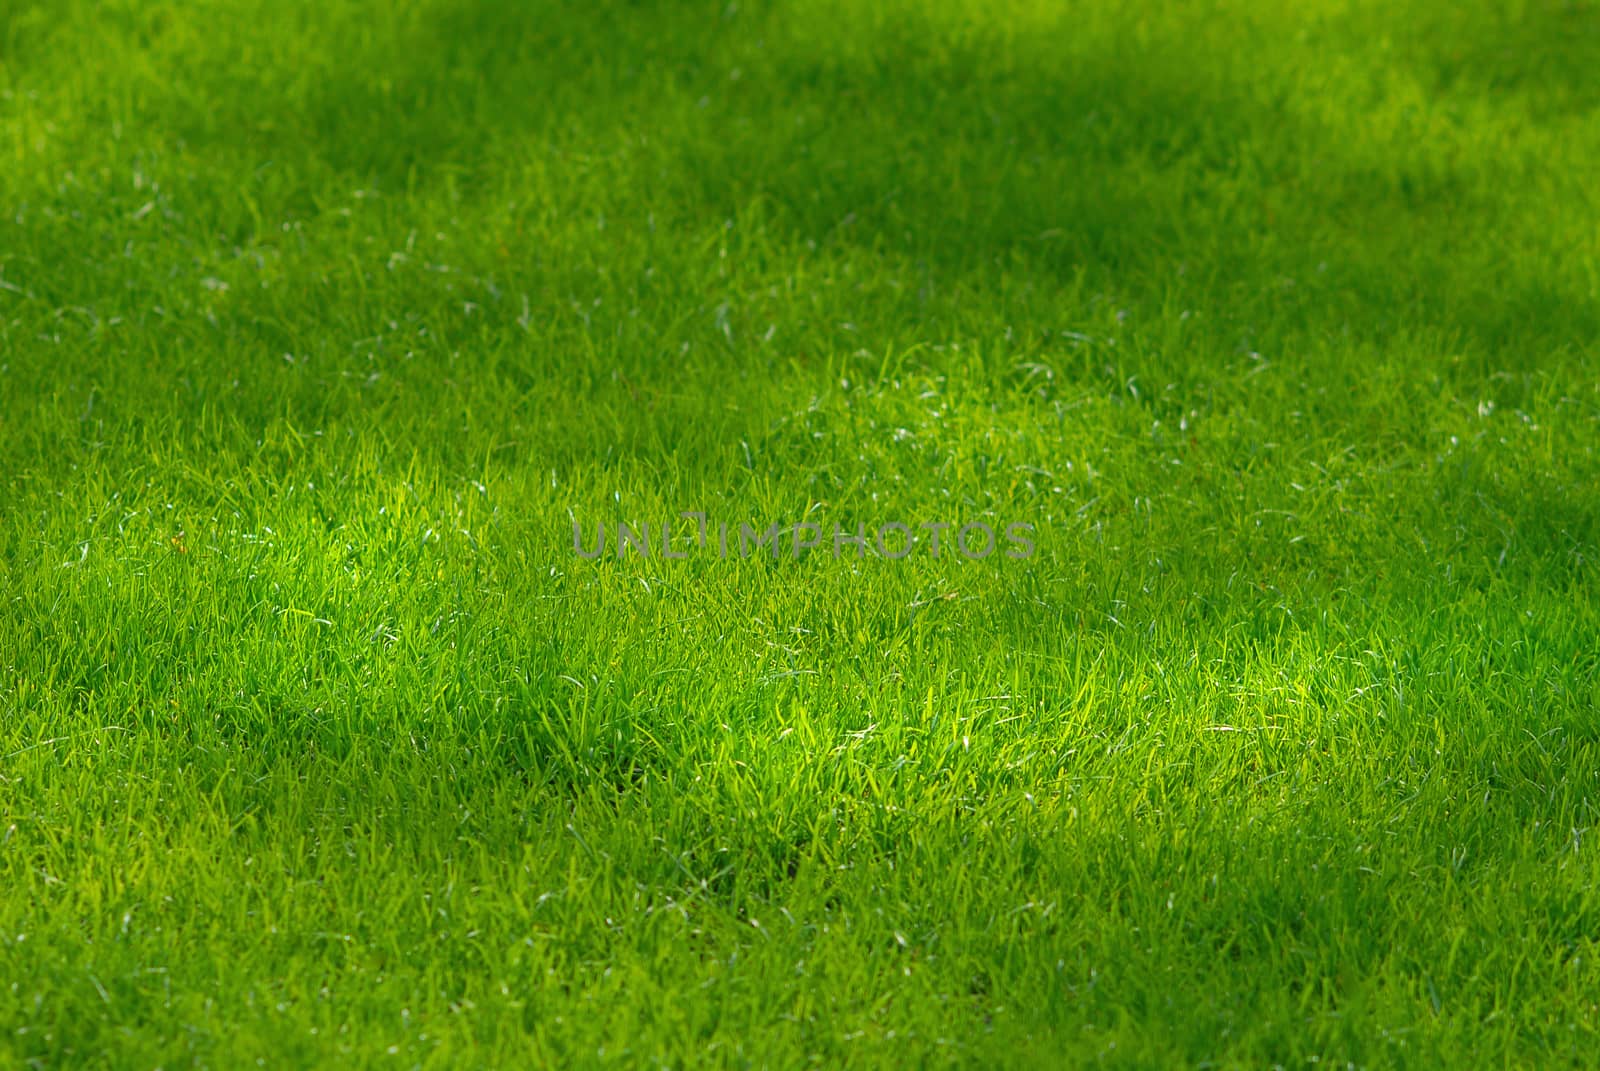 Green grass lawn background. Focus in one third of image.